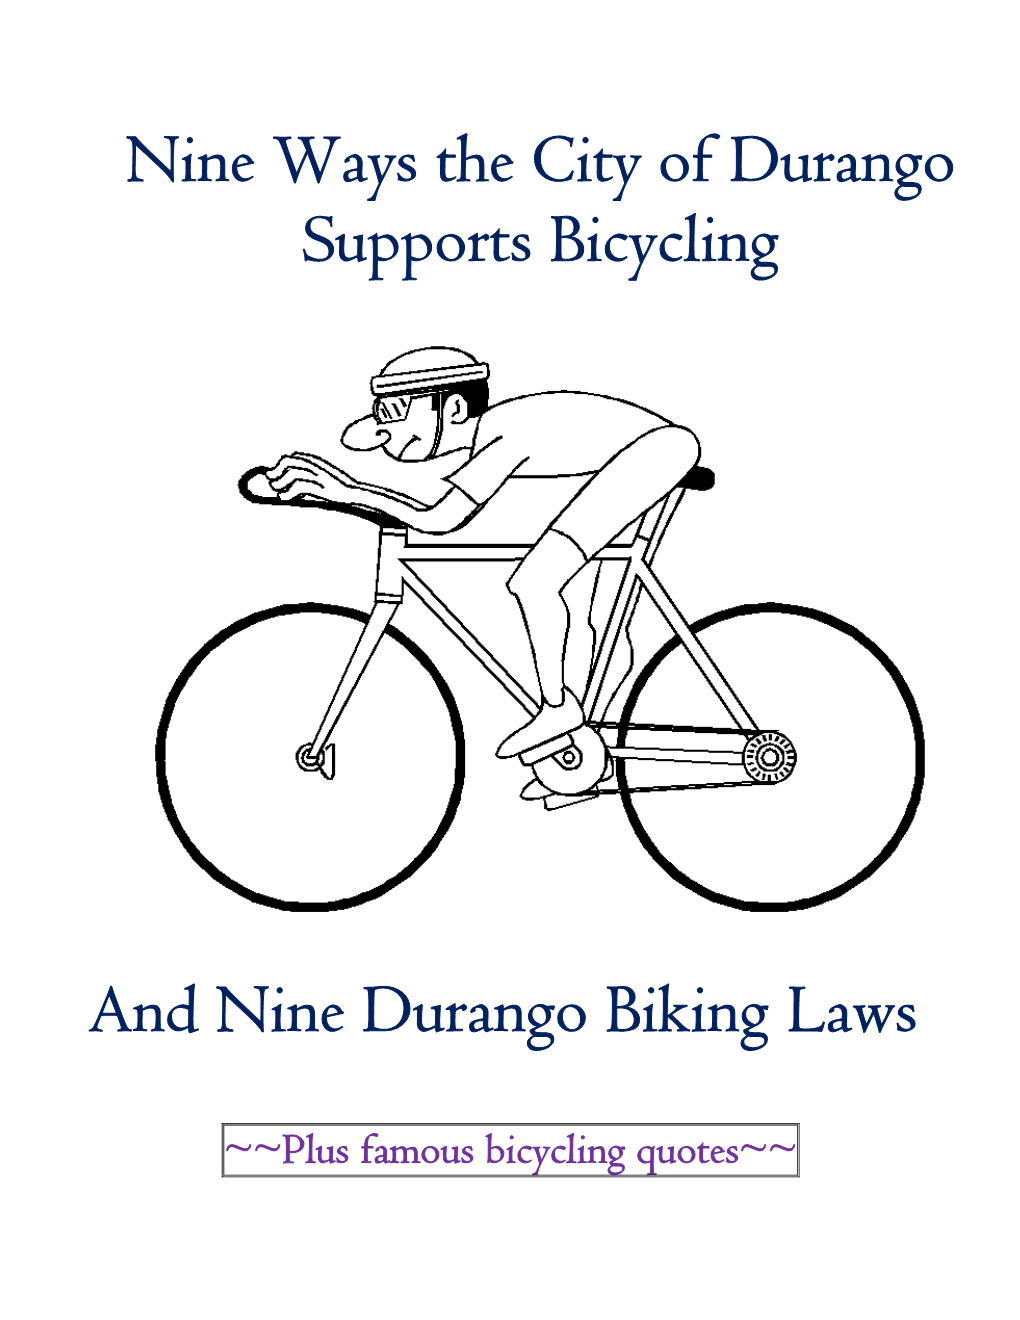 Nine Ways the City of Durango Supports Bicycling and Nine